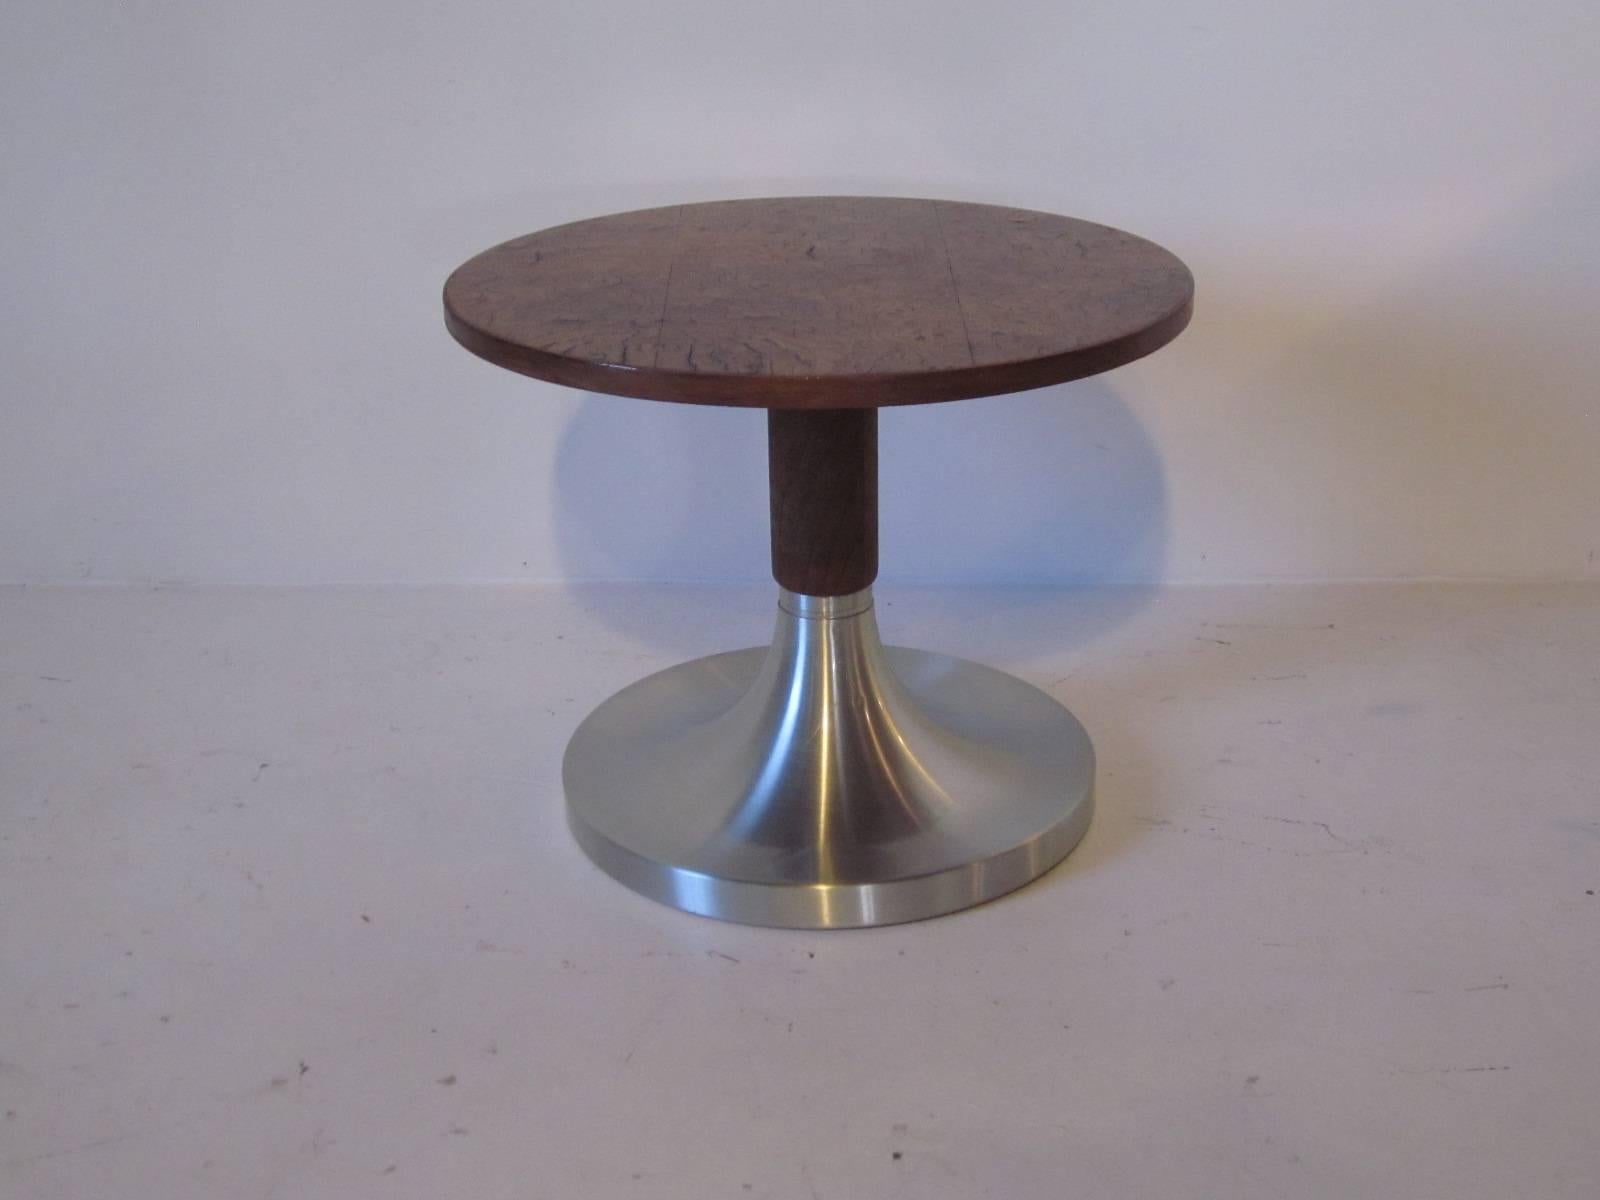 20th Century Burl Wood and Brushed Aluminum Side Table